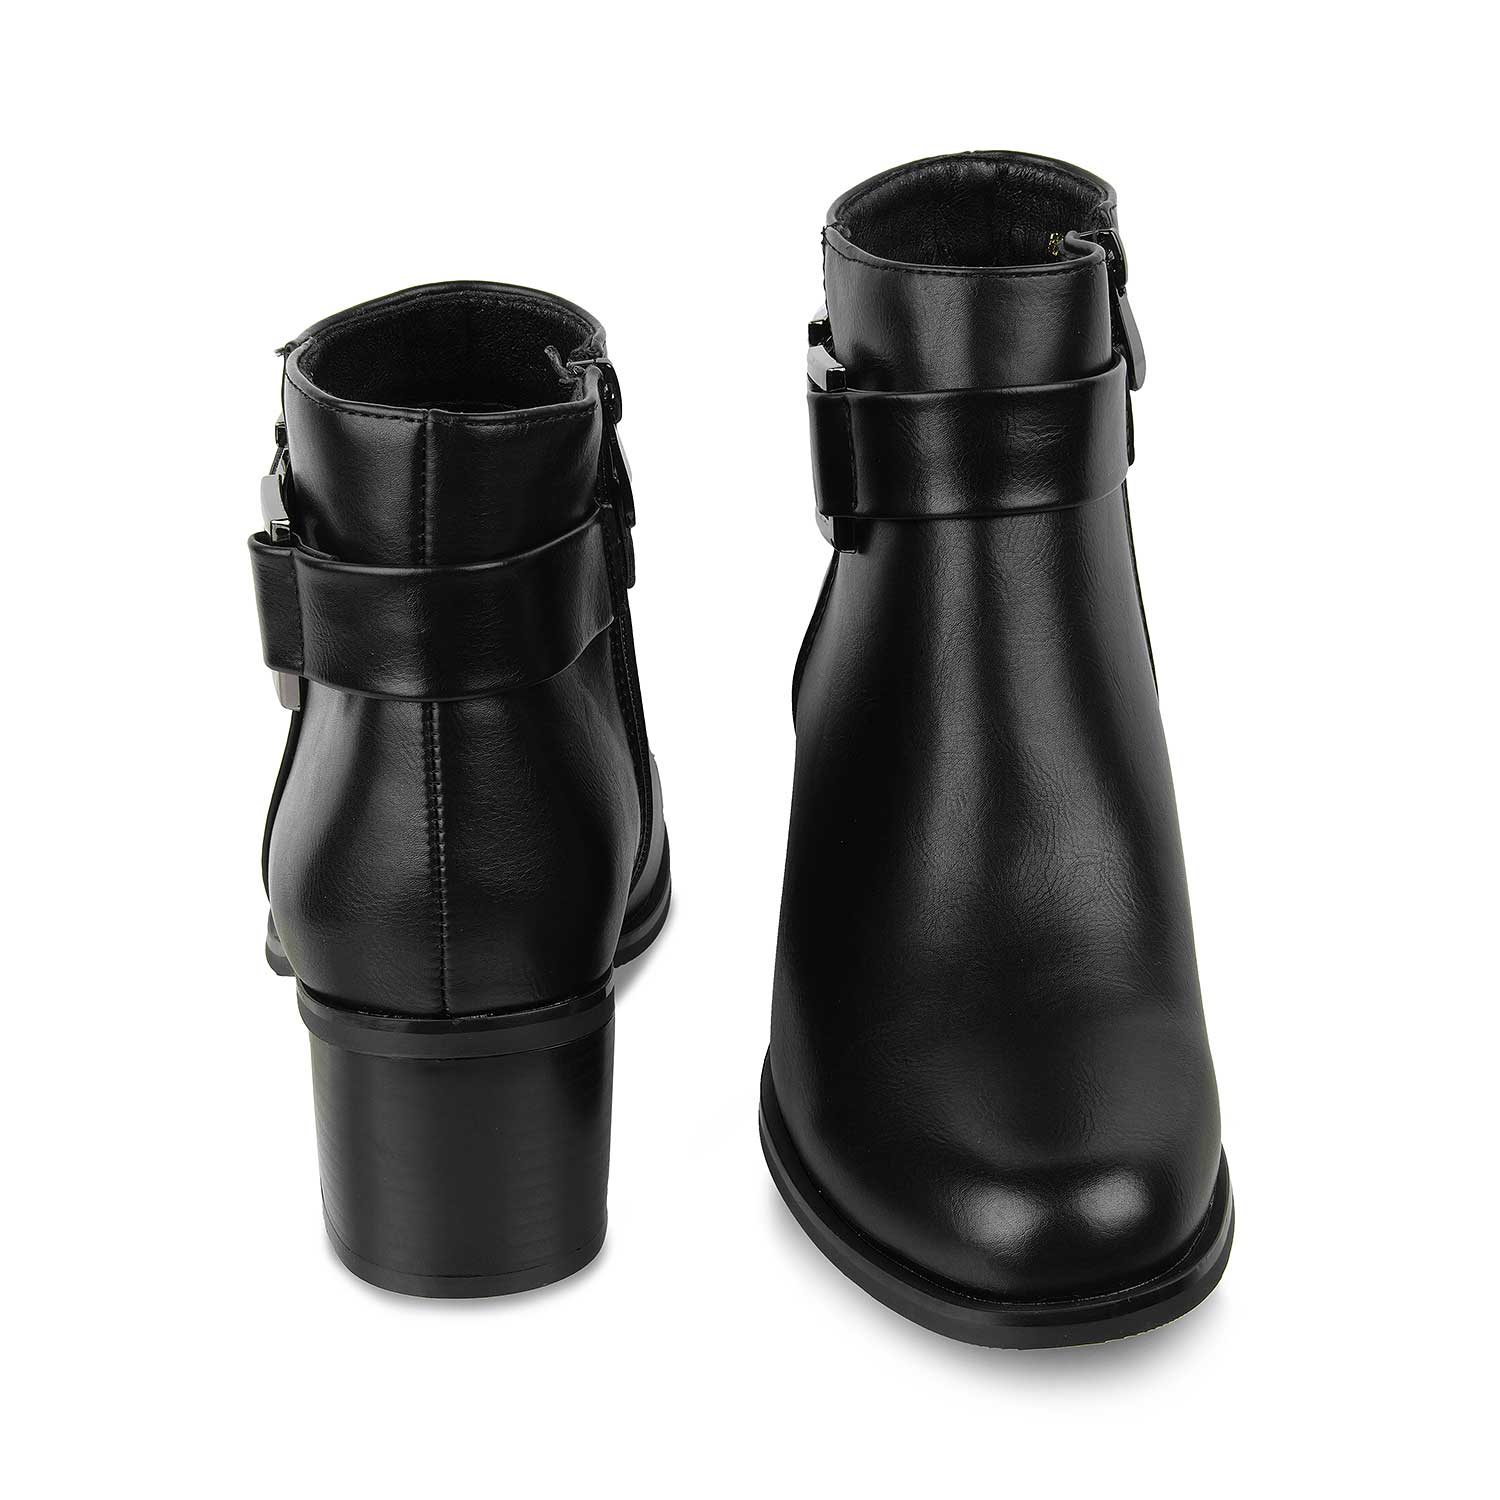 The Seine Black Women's Ankle-length Boots Tresmode